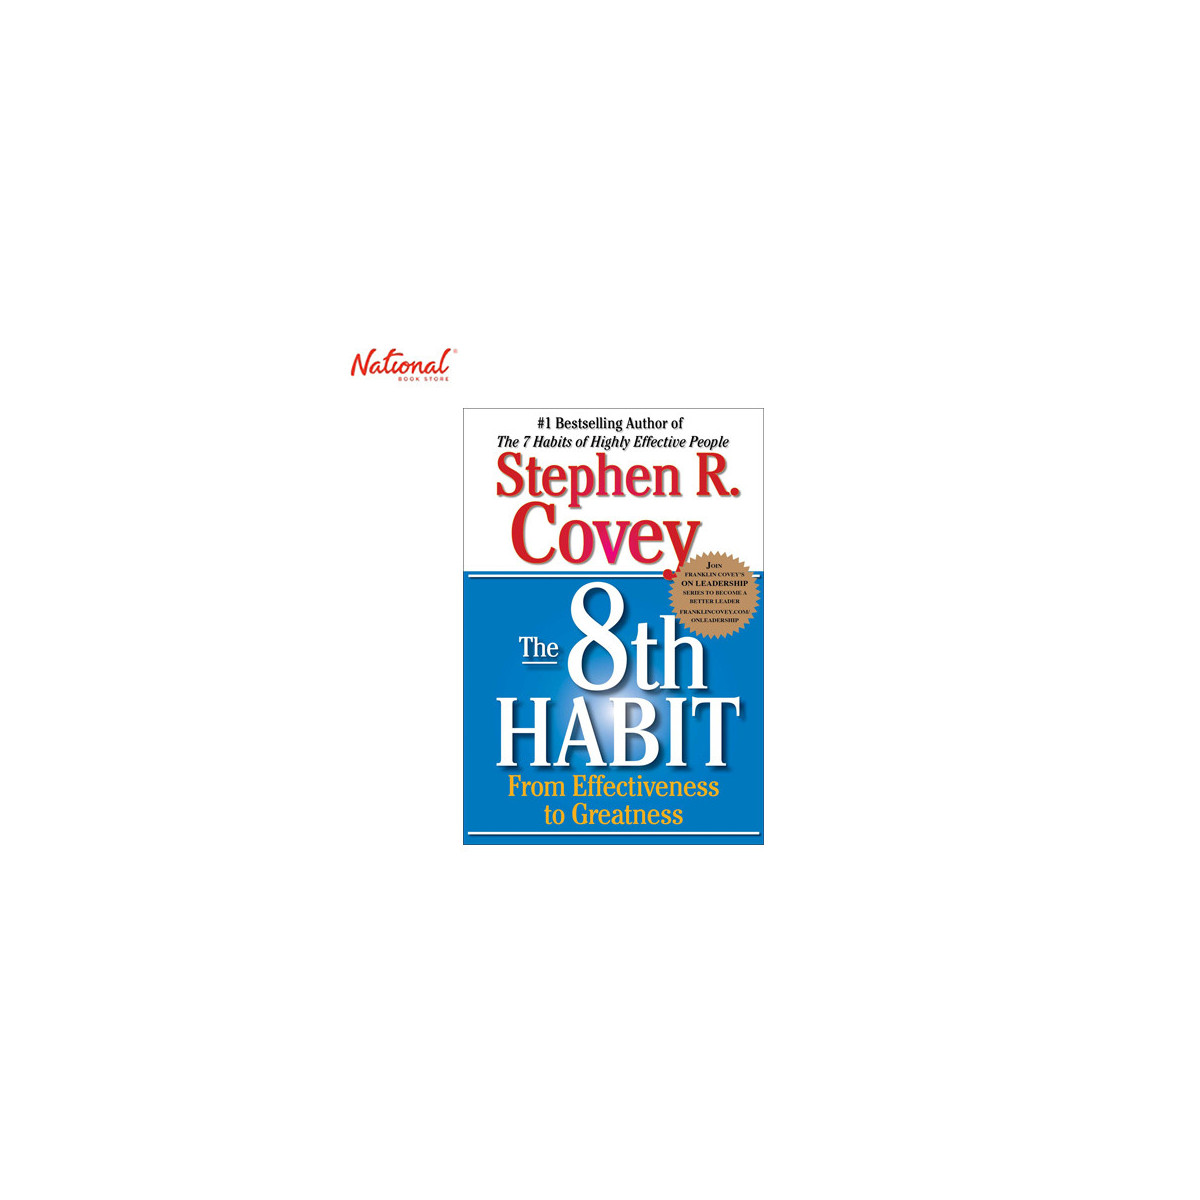 The 8th Habit: From Effectiveness to Greatness Trade Paperback by Stephen R. Covey